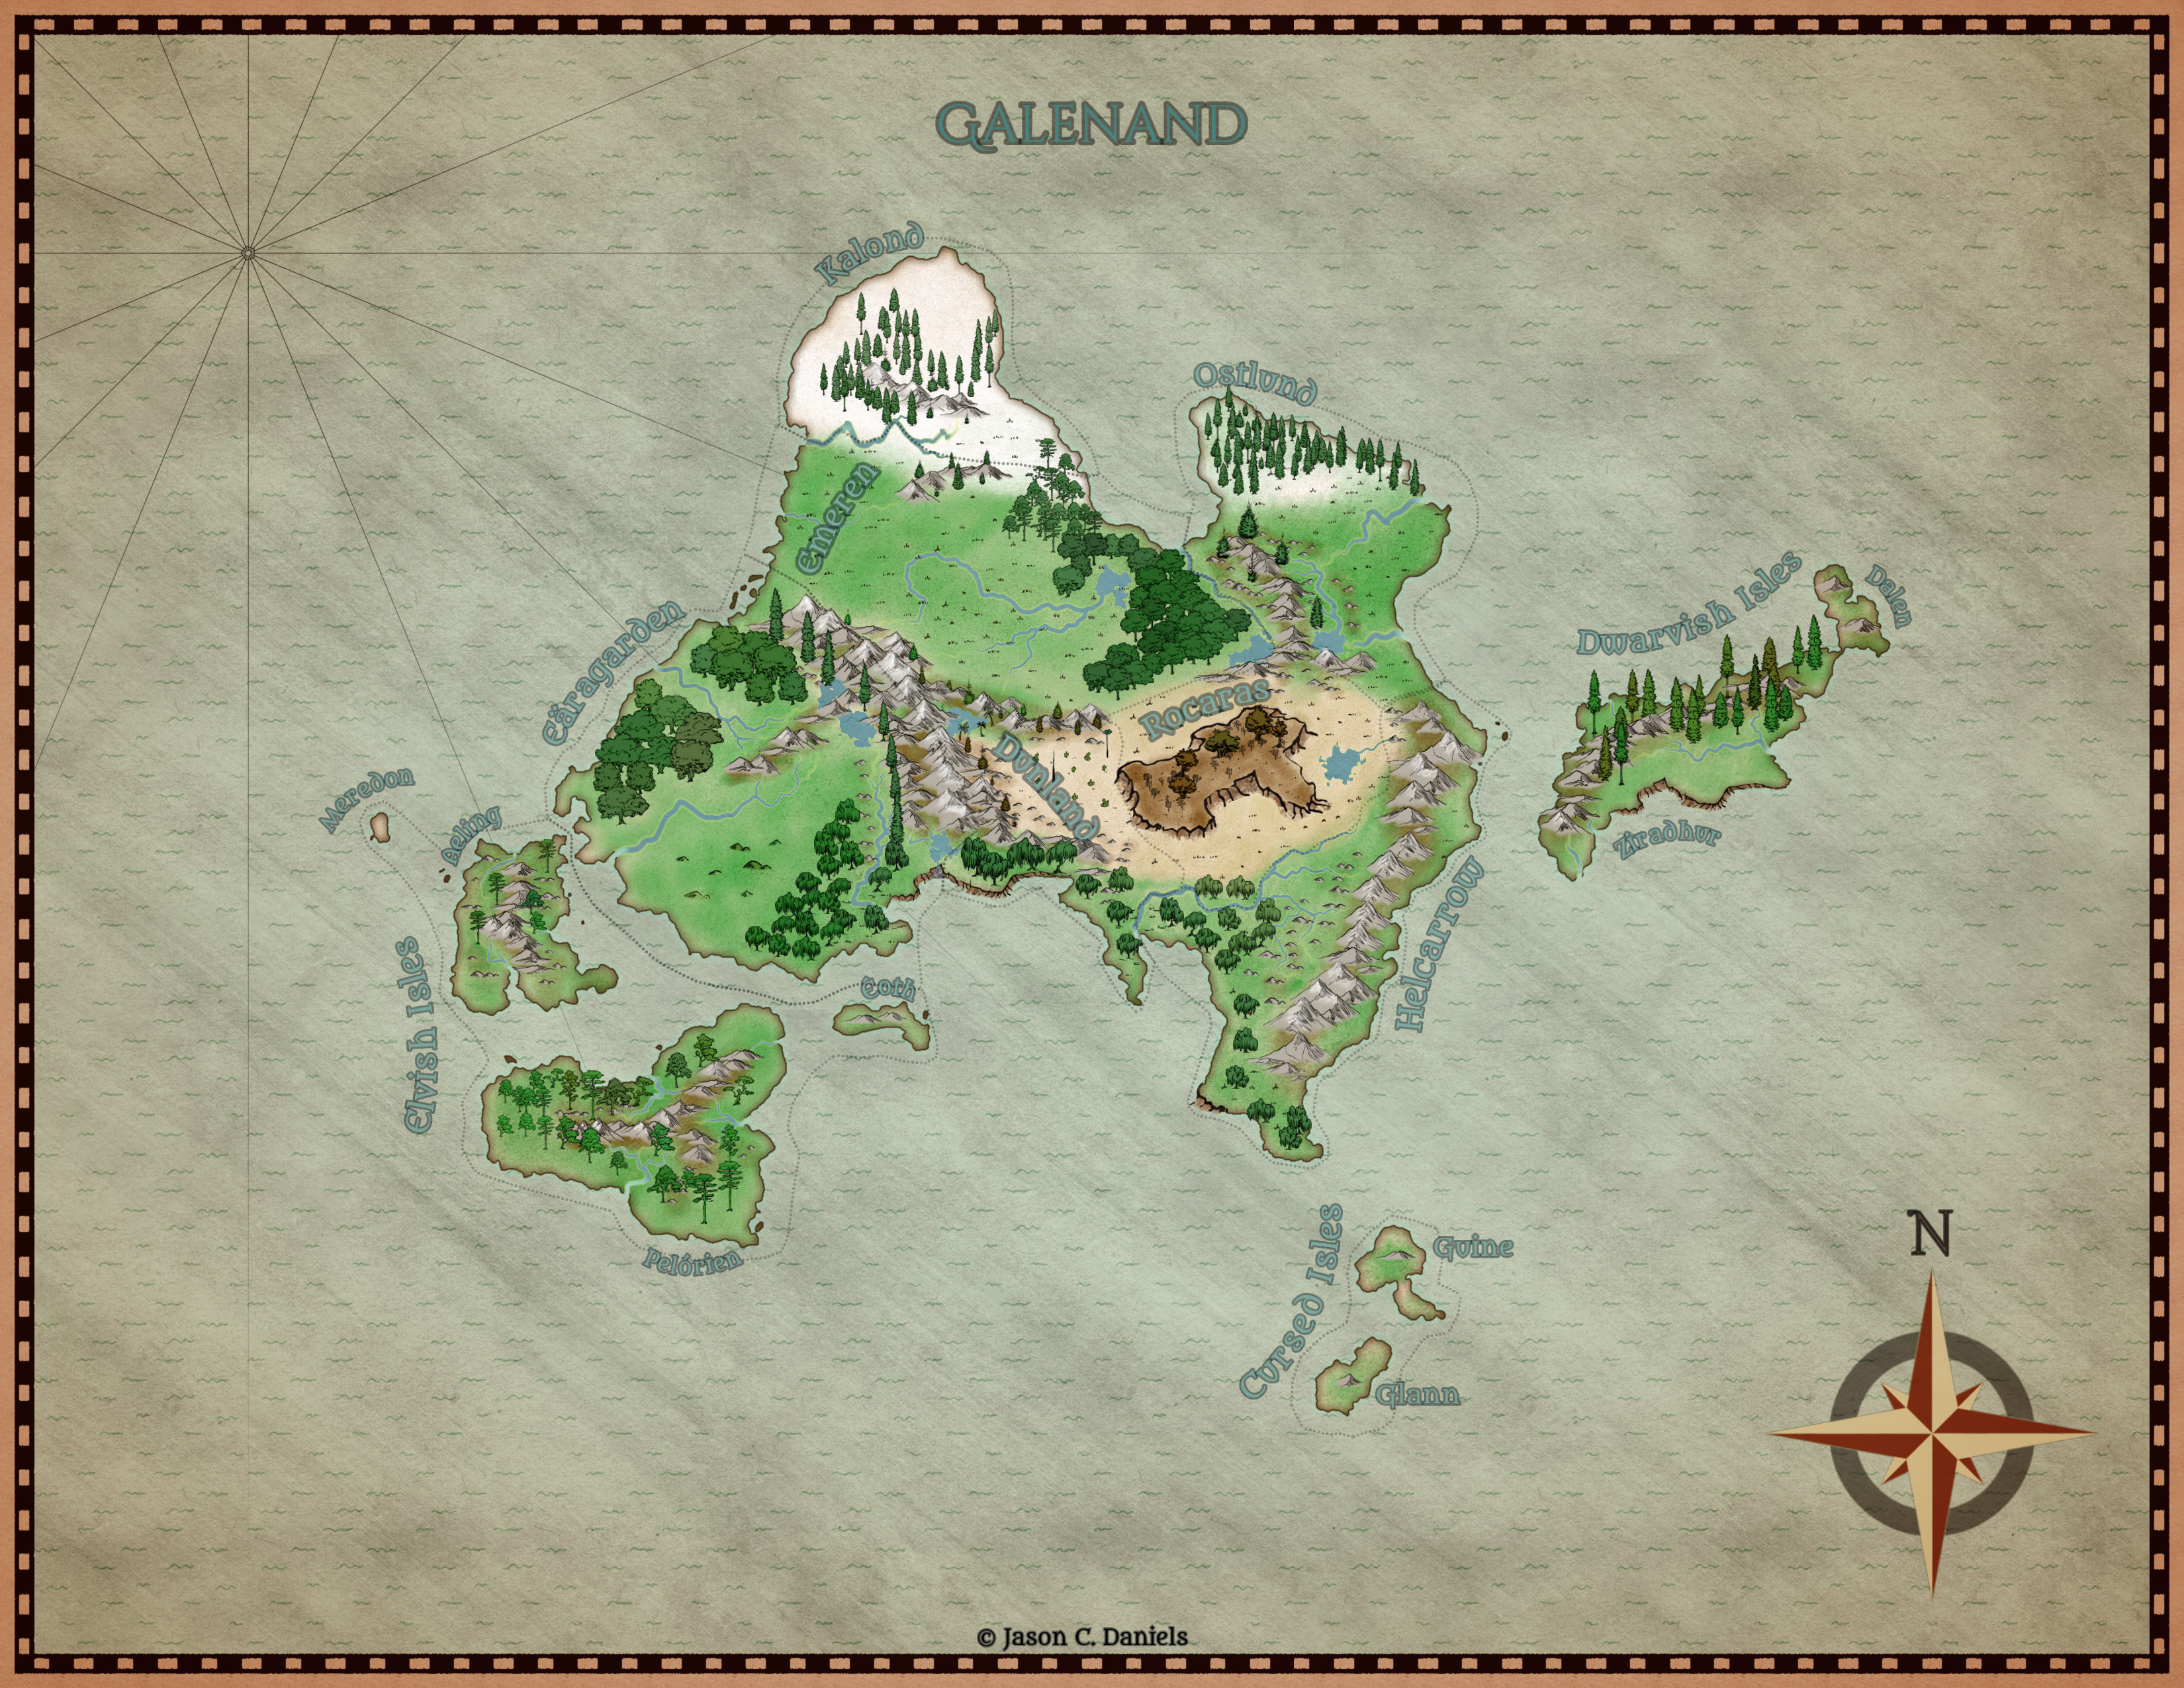 The continent of Galenand